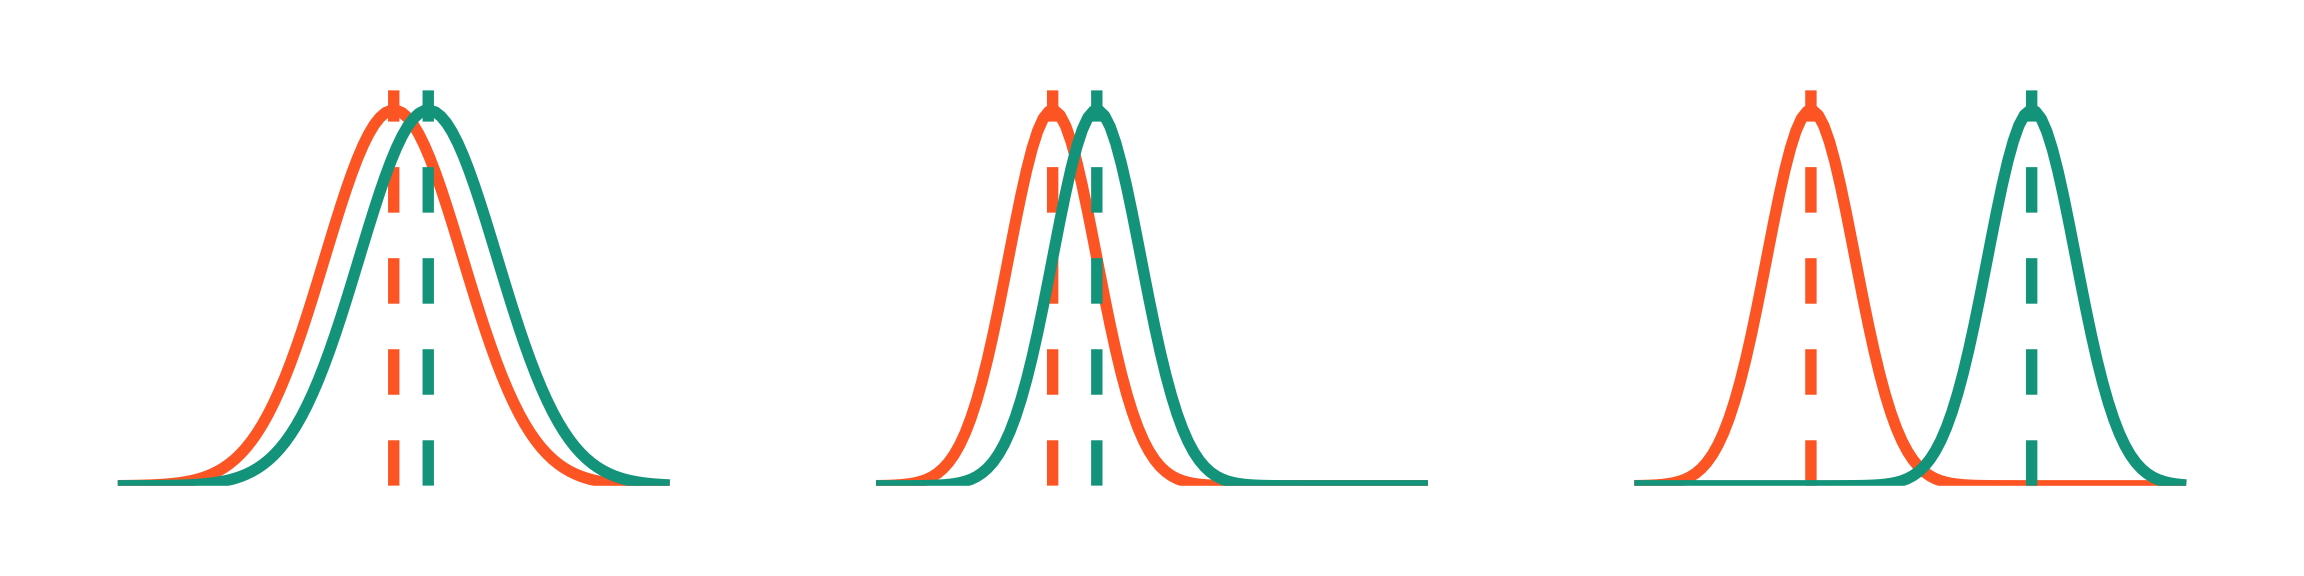 Visual representation of how comparison of means between groups works. There are three pairs of samples, one orange and one green, each with different distances between means.